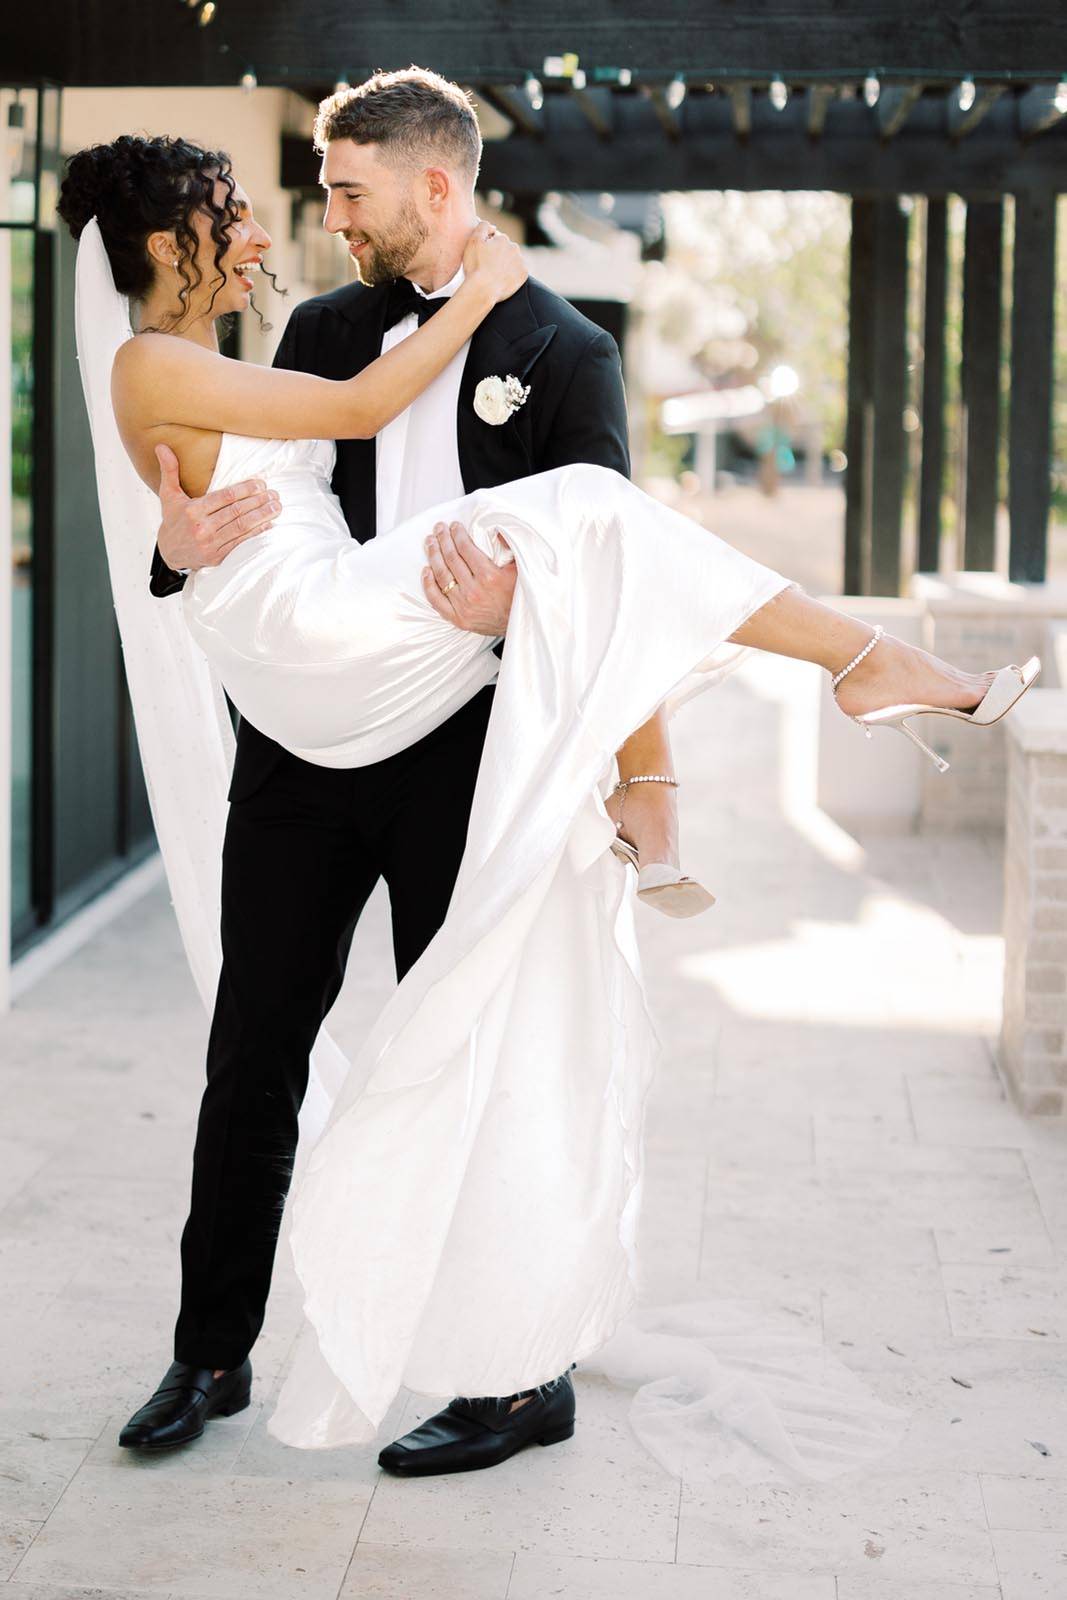 The groom lifting his bride in his arms